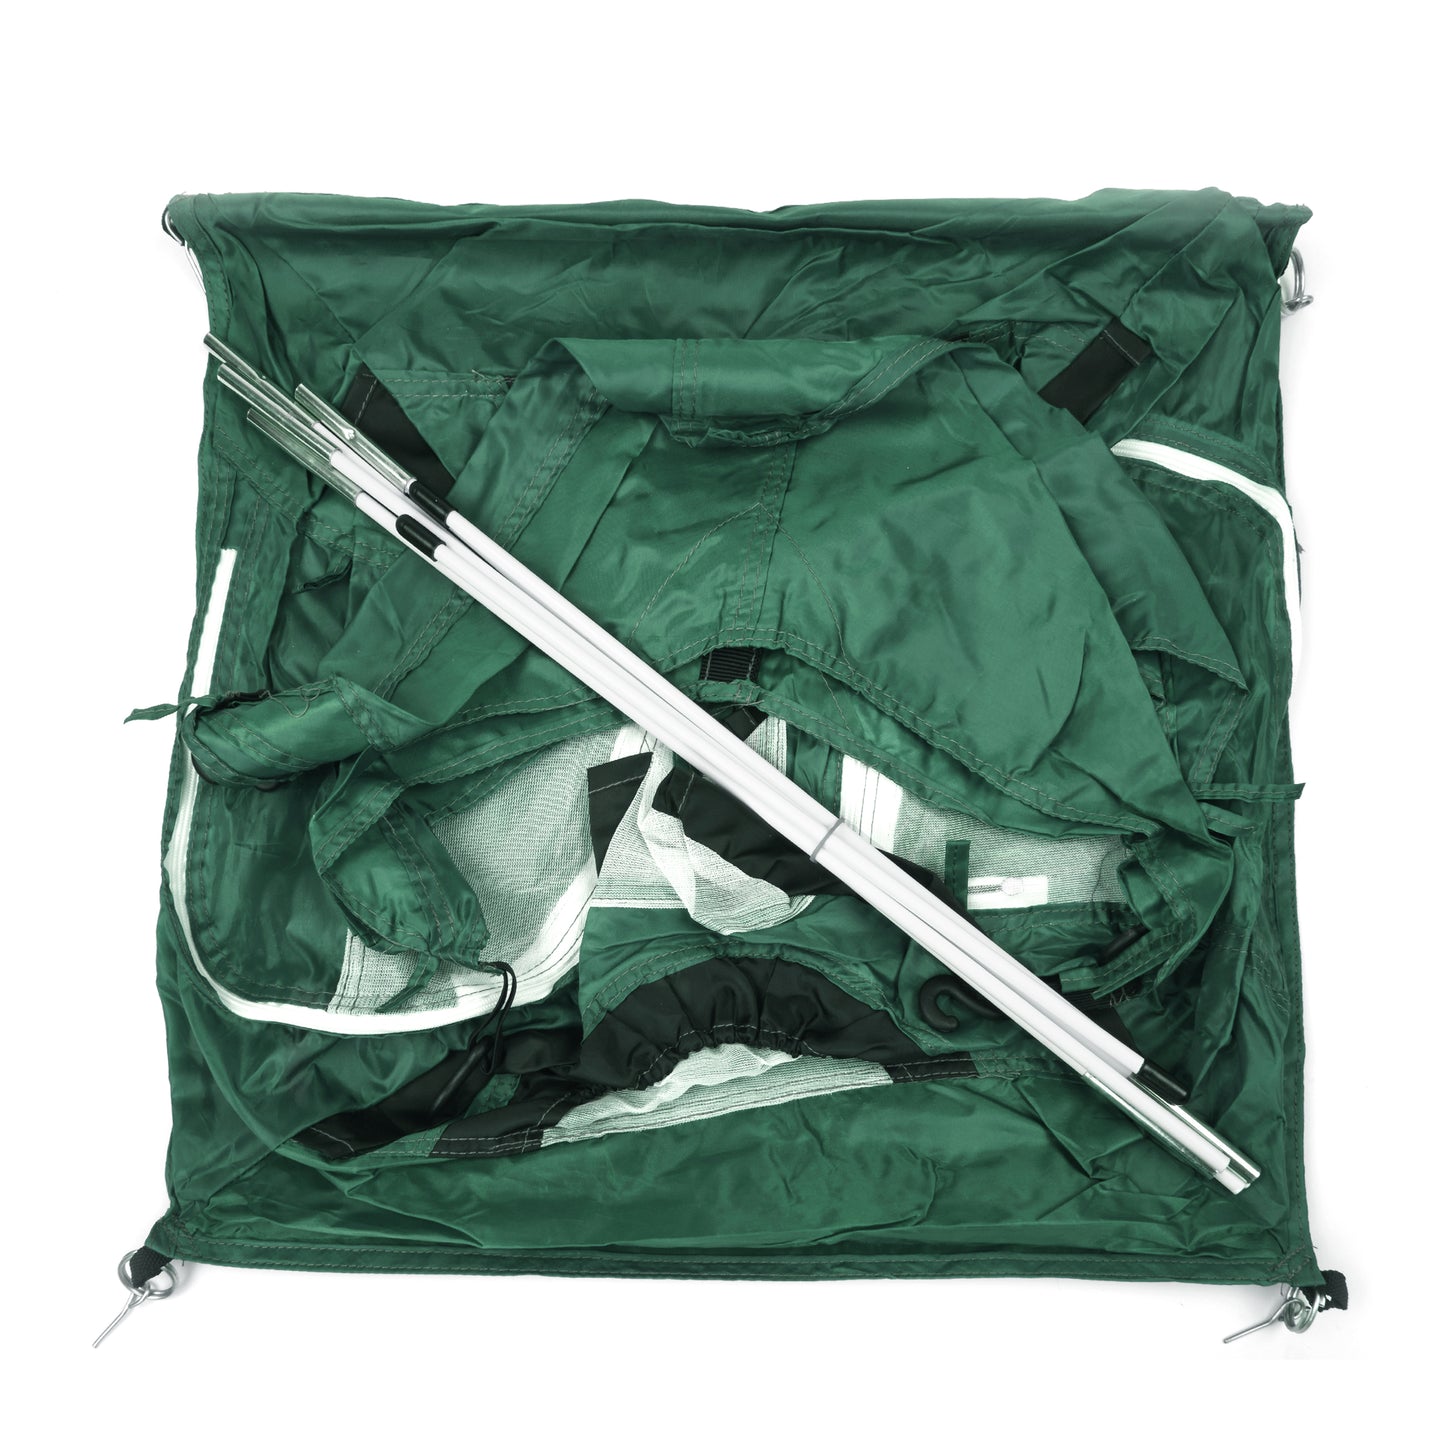 green tiny tent shown deconstructed.  All parts are shown.